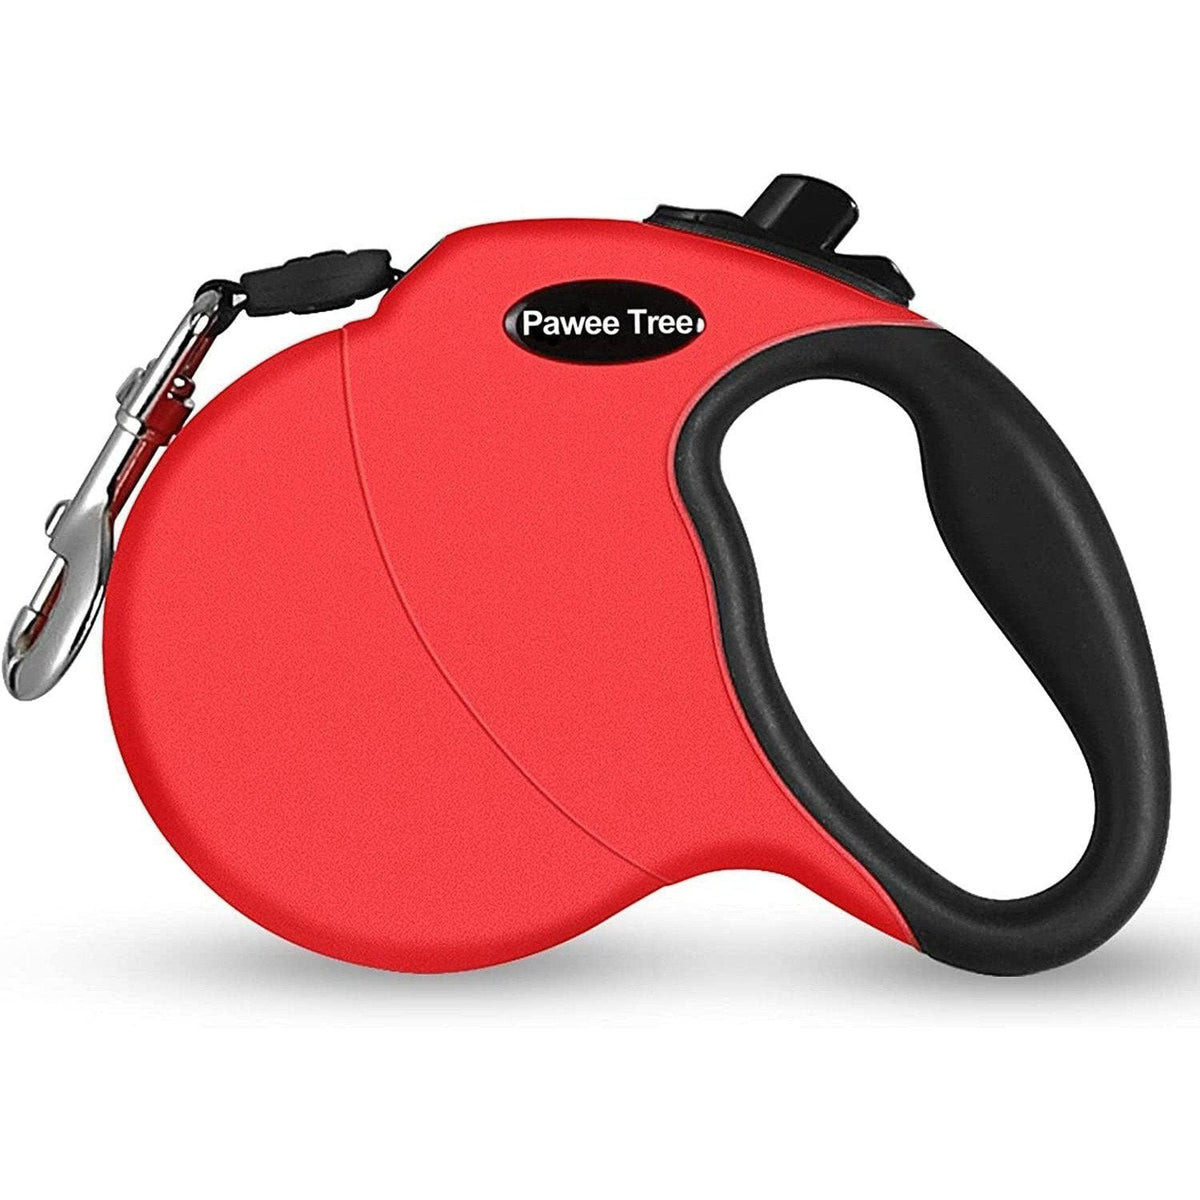 A red and black Pets Paradise Effortless Walking 13ft Retractable Dog Leash.